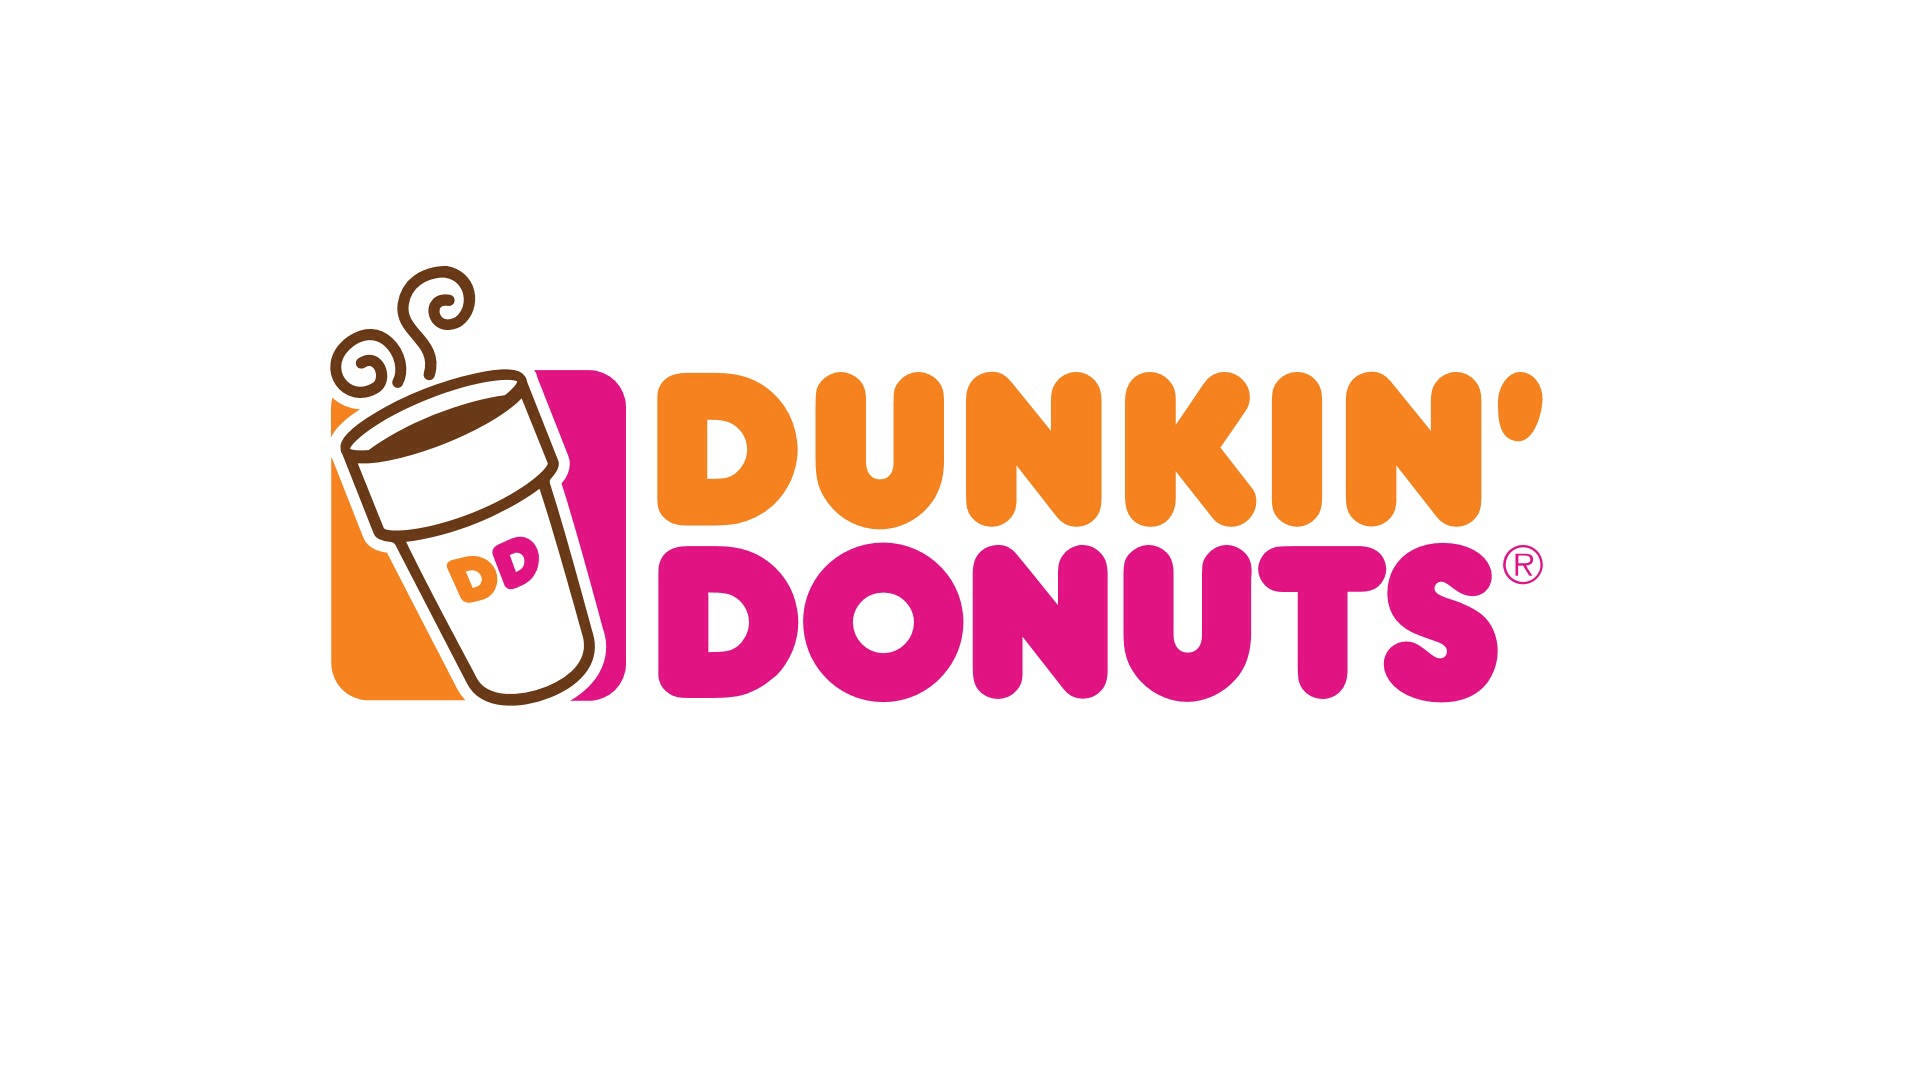 Dunkin Donuts Wallpaper Images